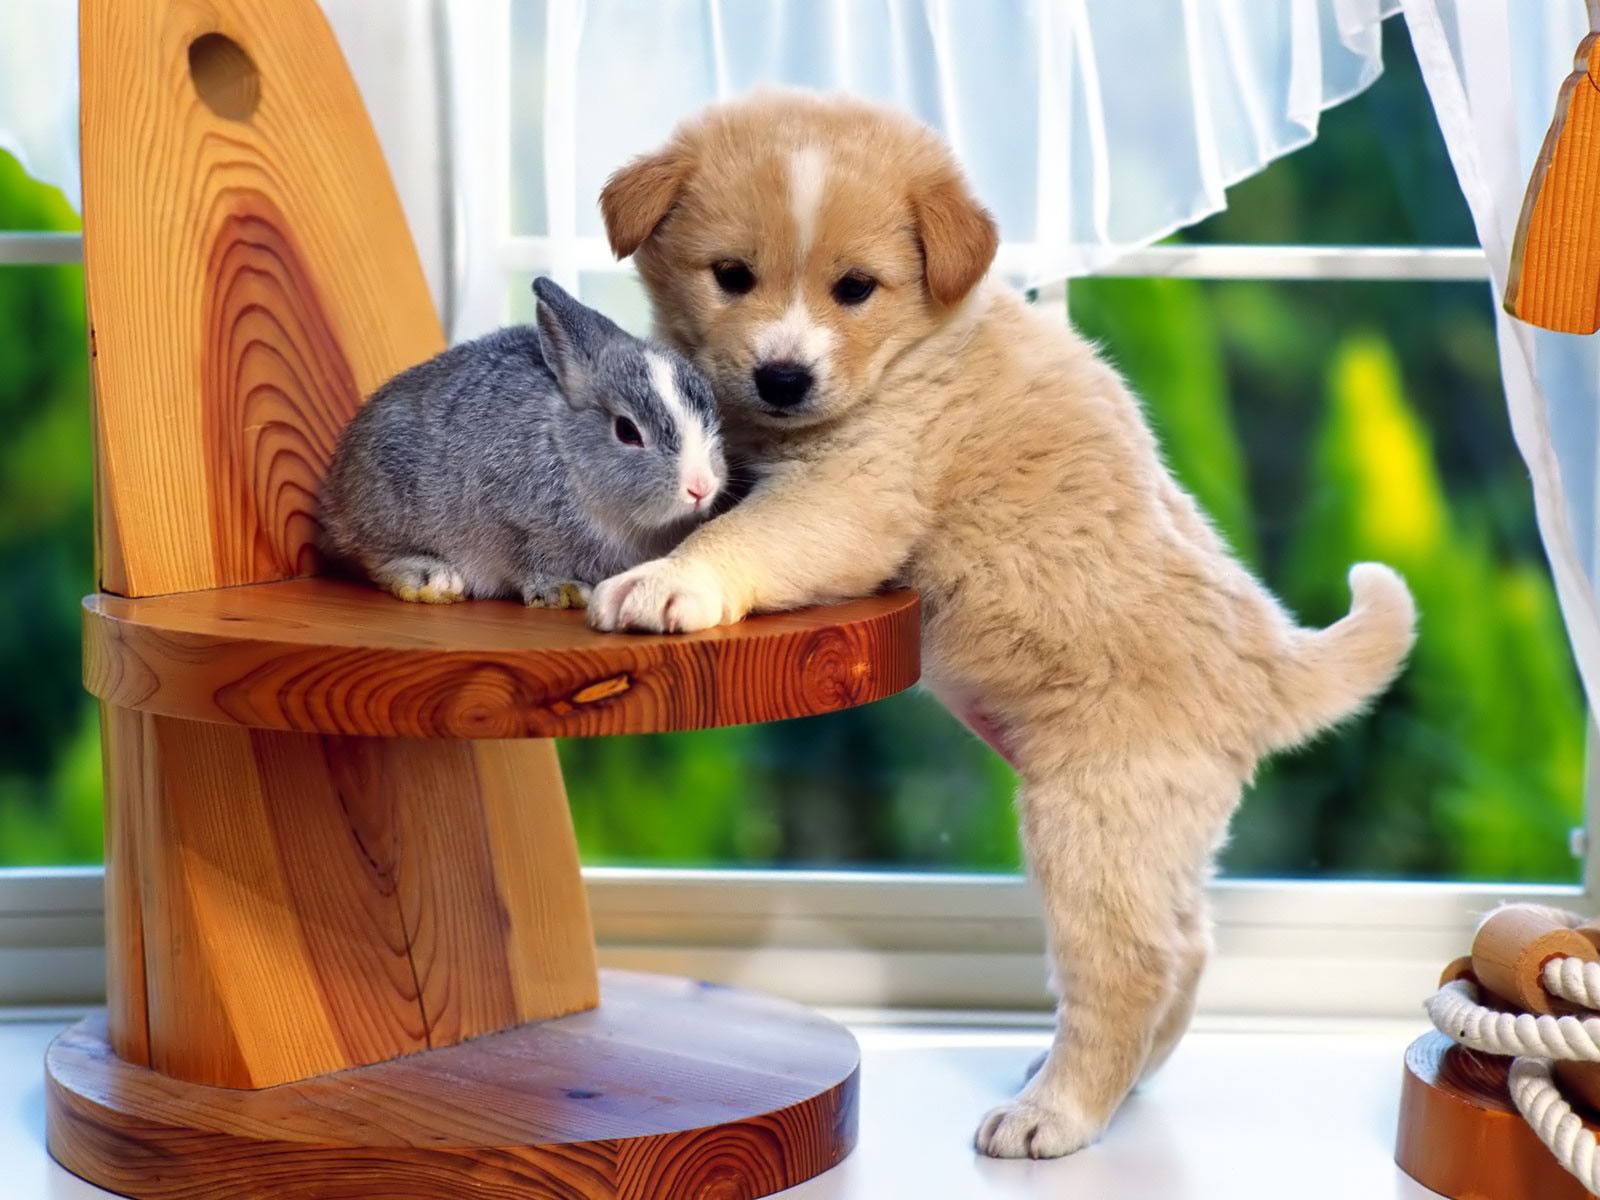 Puppy And The Bunny Desktop Wallpaper